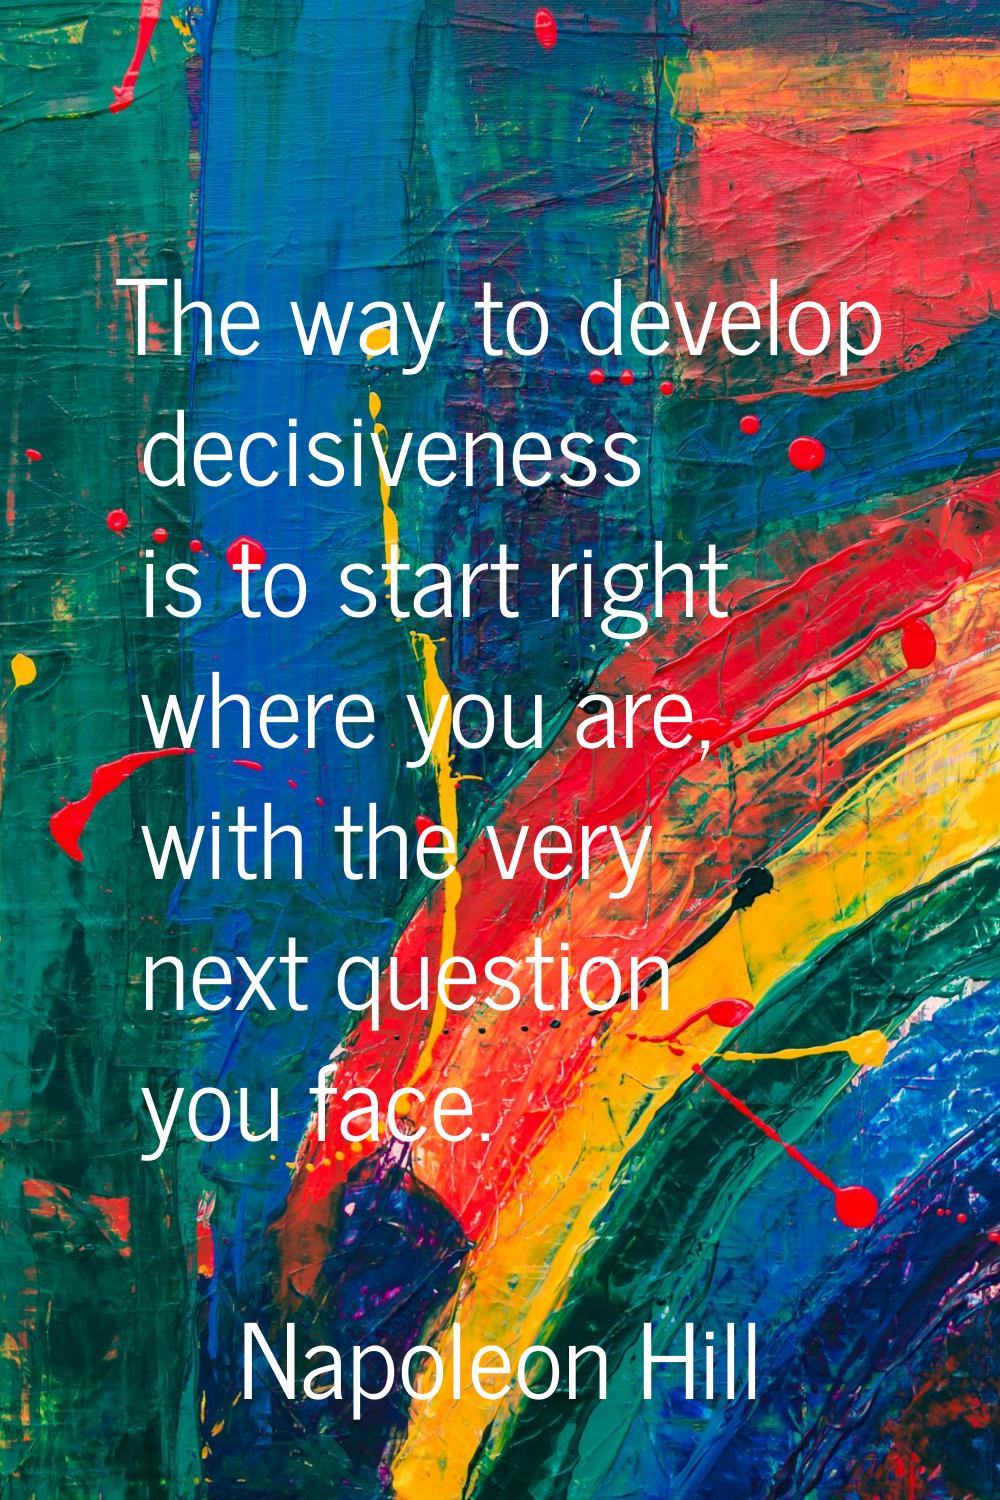 The way to develop decisiveness is to start right where you are, with the very next question you fa